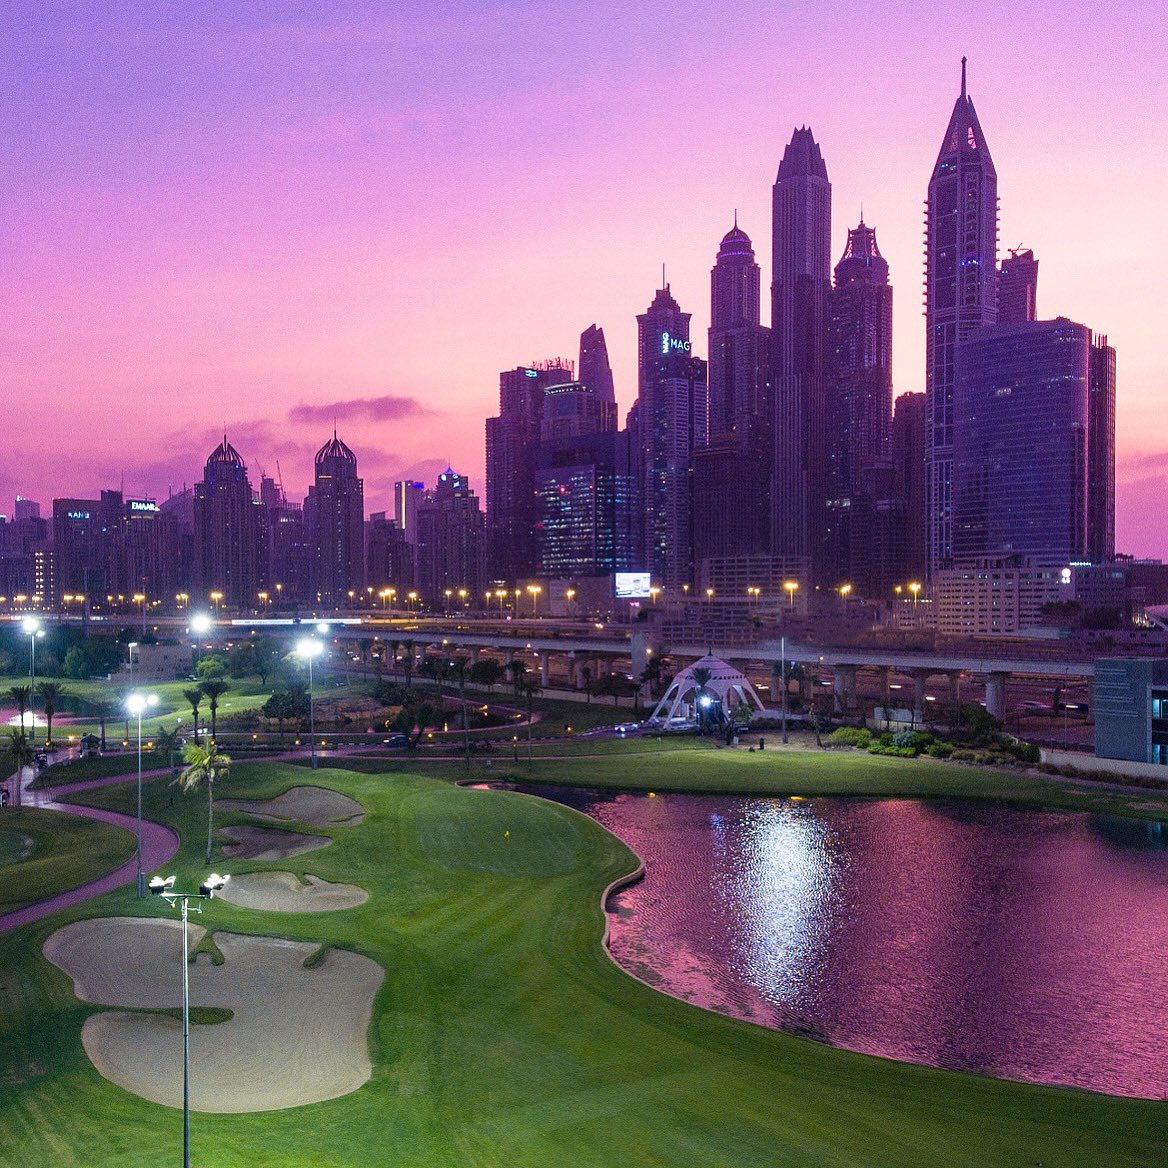 Another day is gone! Are you ready for this weekend of #golf? #emiratesgolfclub #golfclub #golfer #sunset #dubai